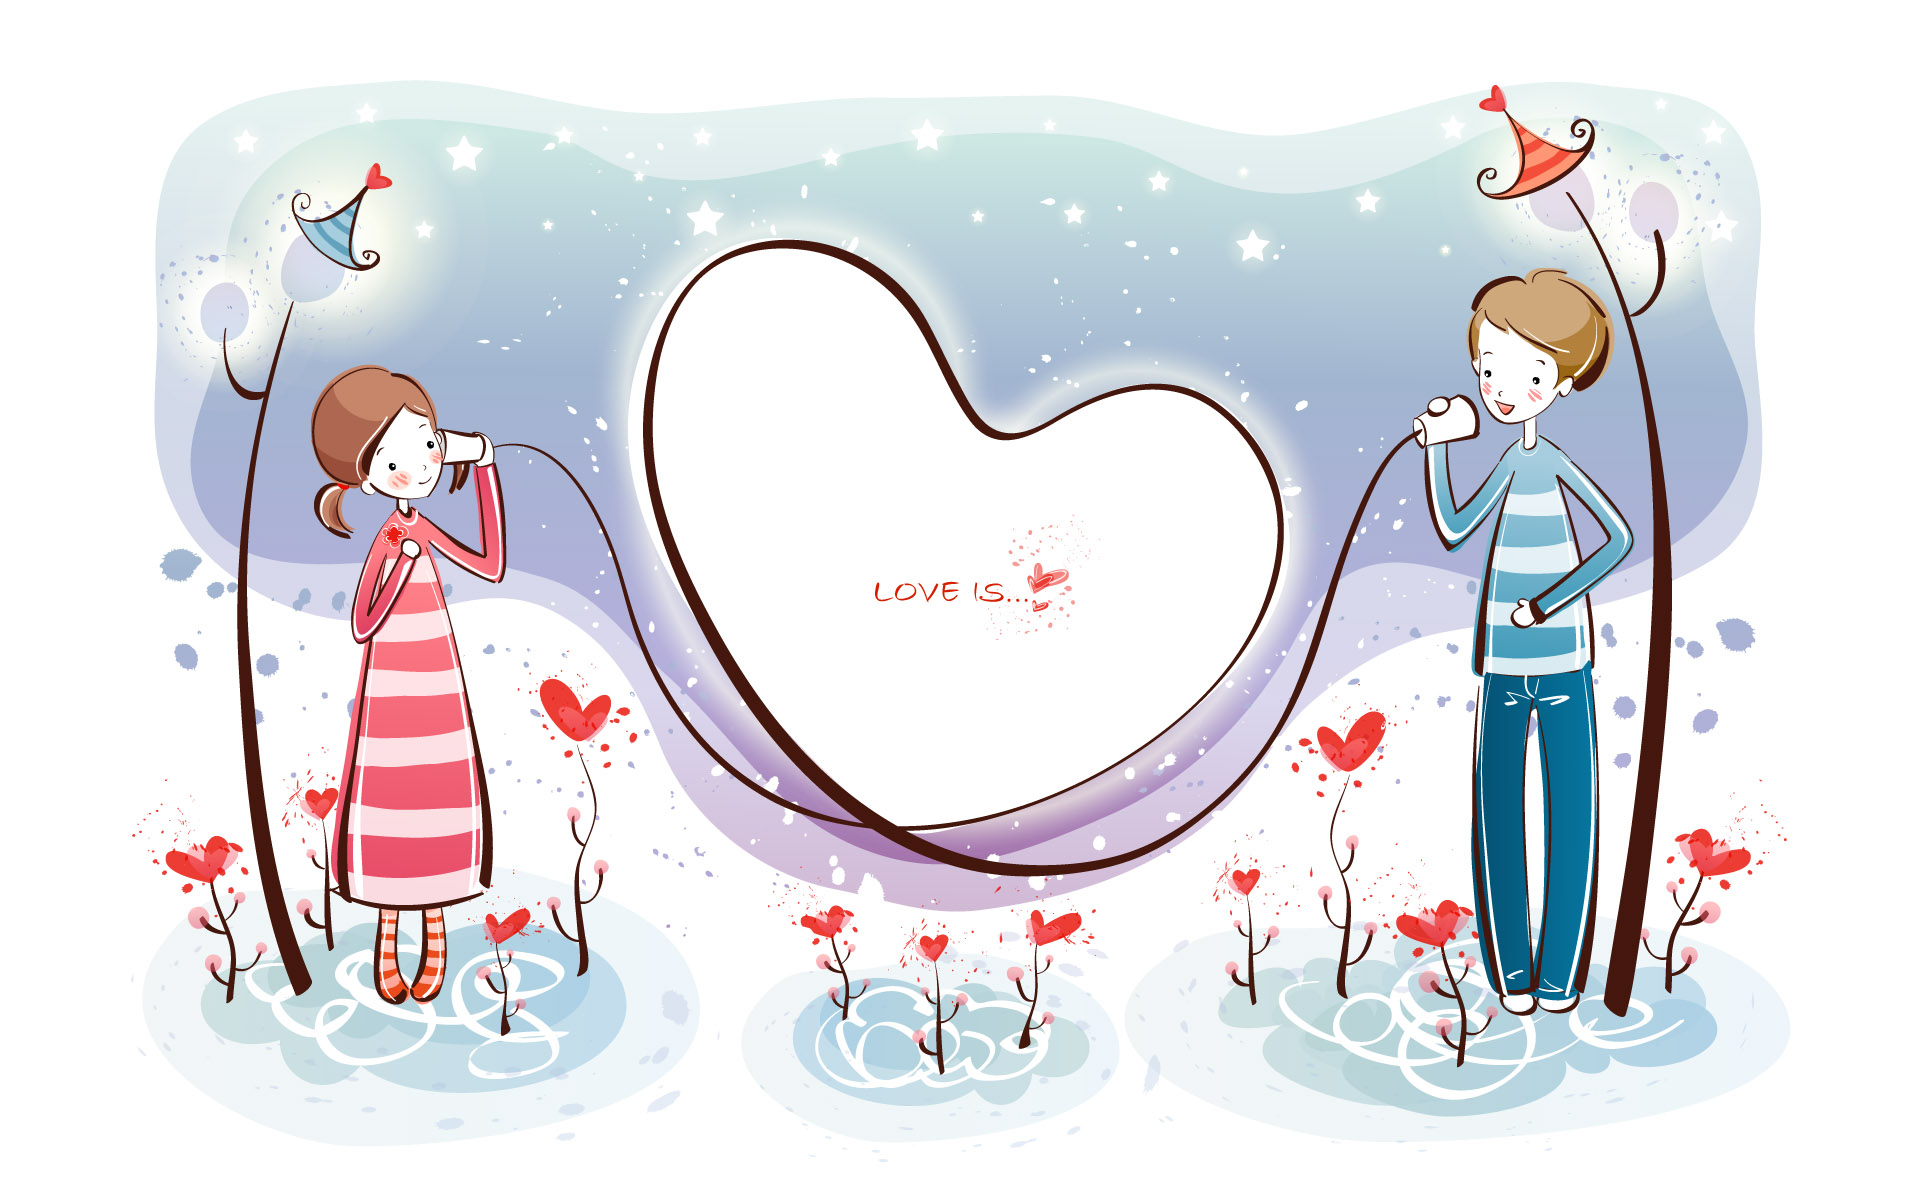 Clip Arts Related To : fall in love hd. view all Cartoon Couple Images). 